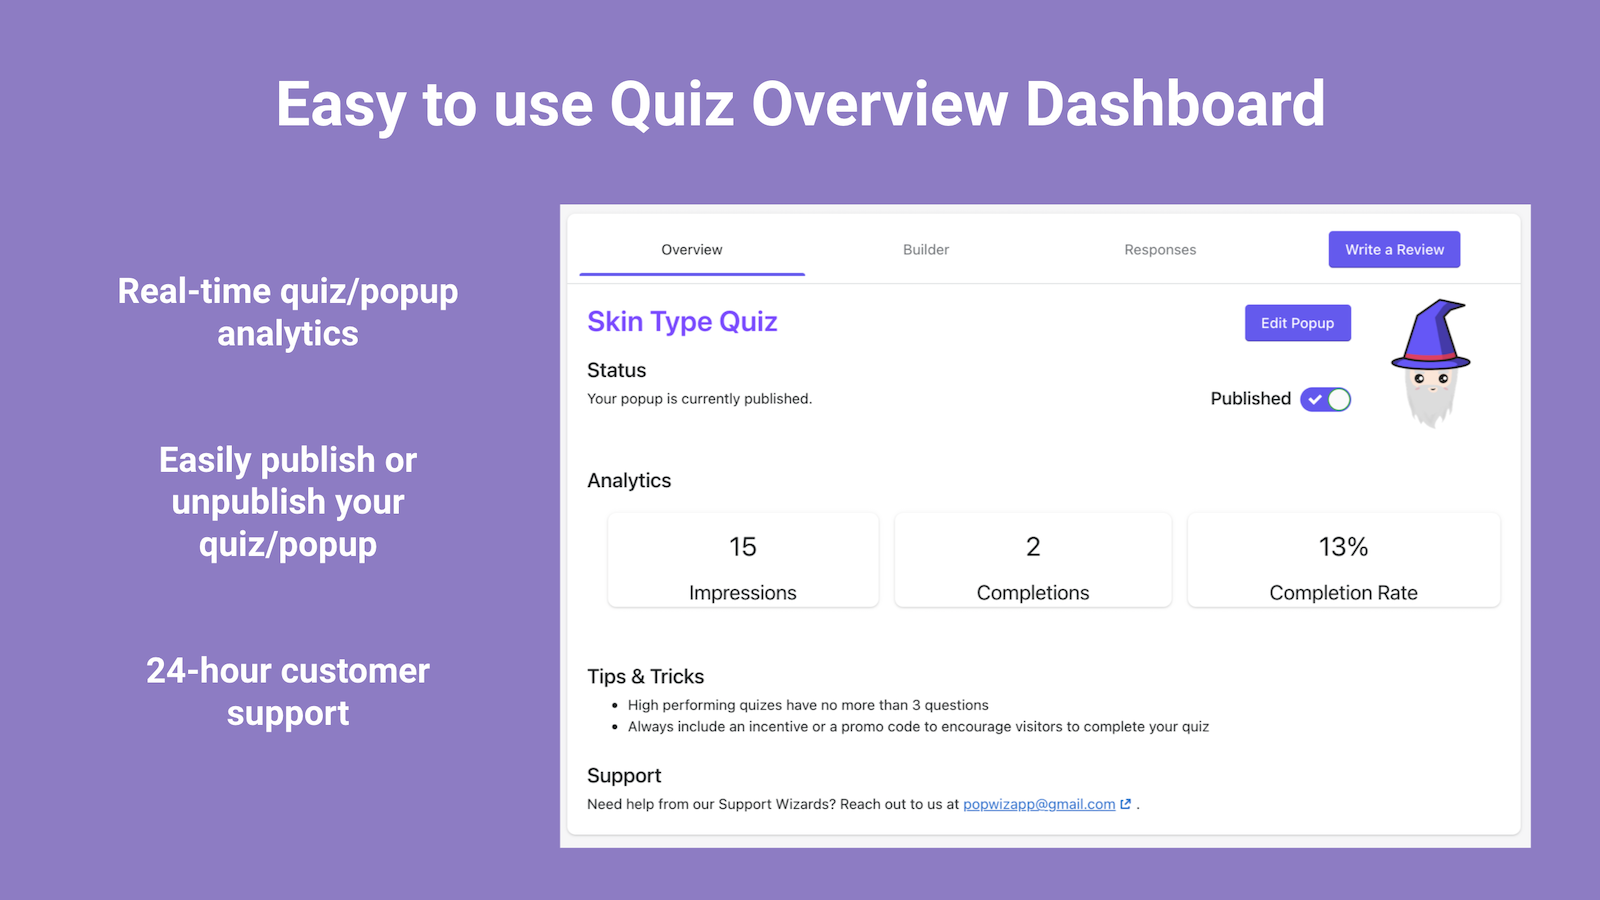 Easy to use Quiz Overview Dashboard